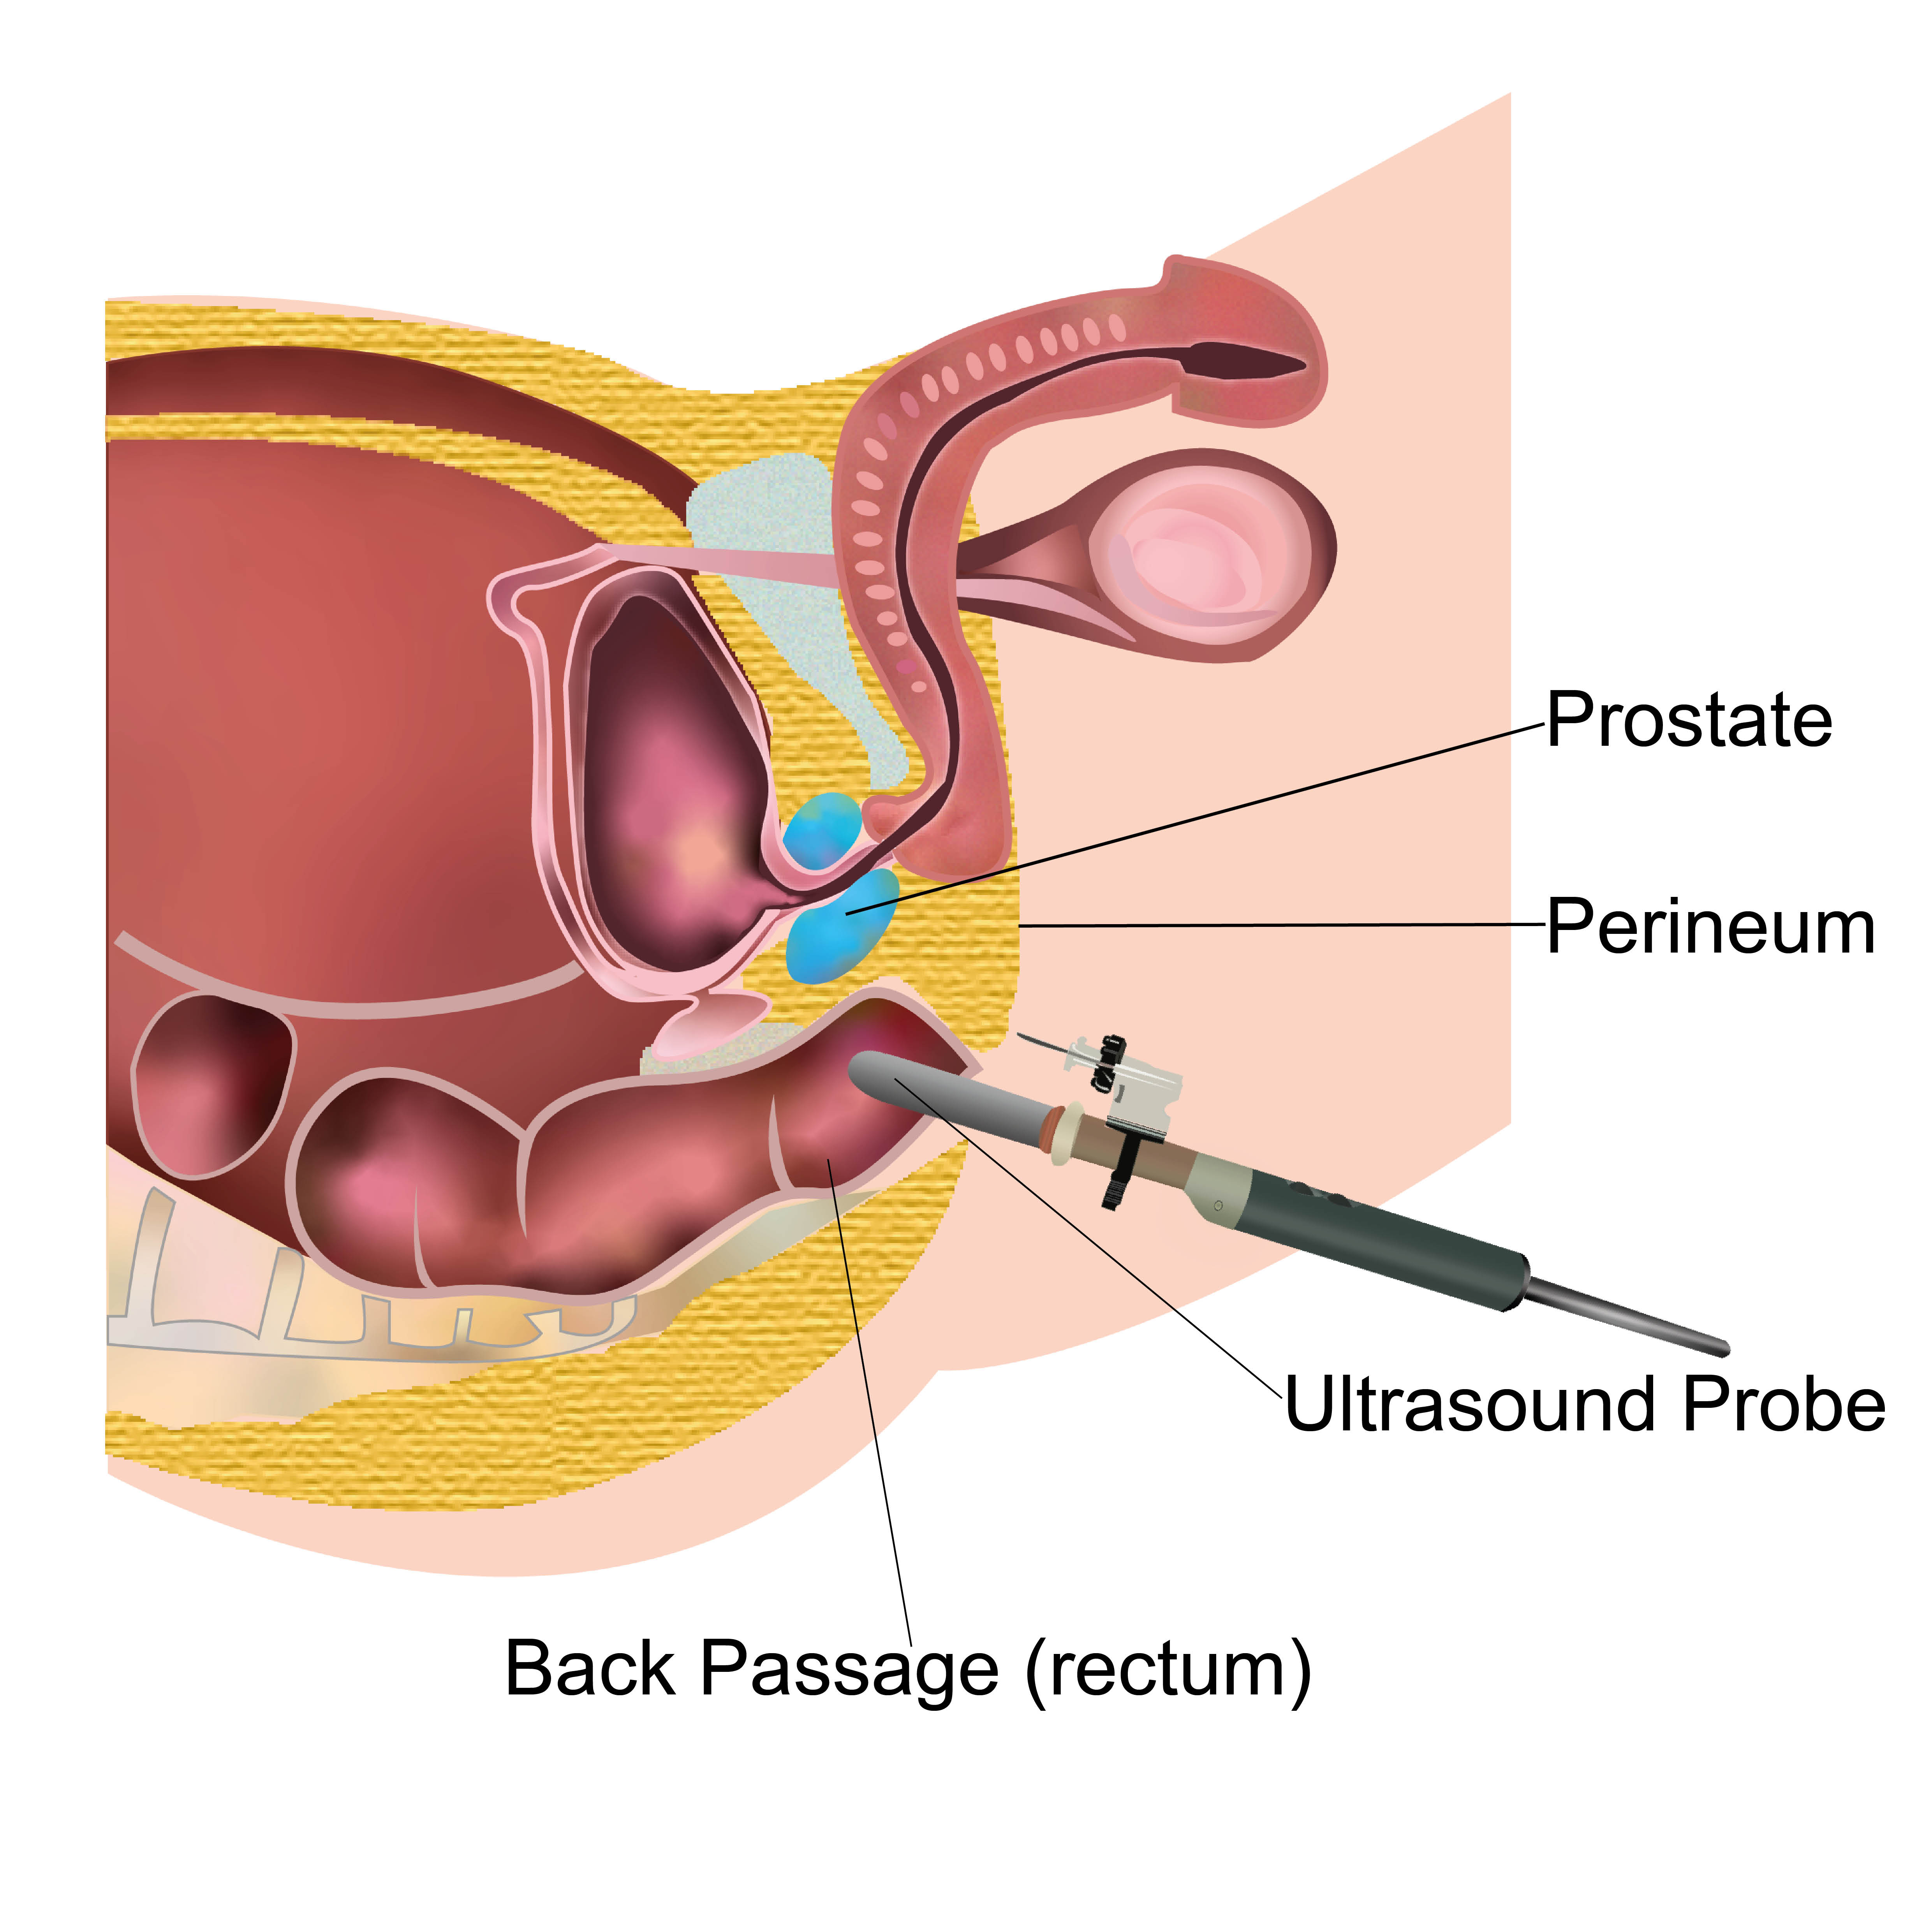 Ultrasound probe being inserted into the back passage (rectum)